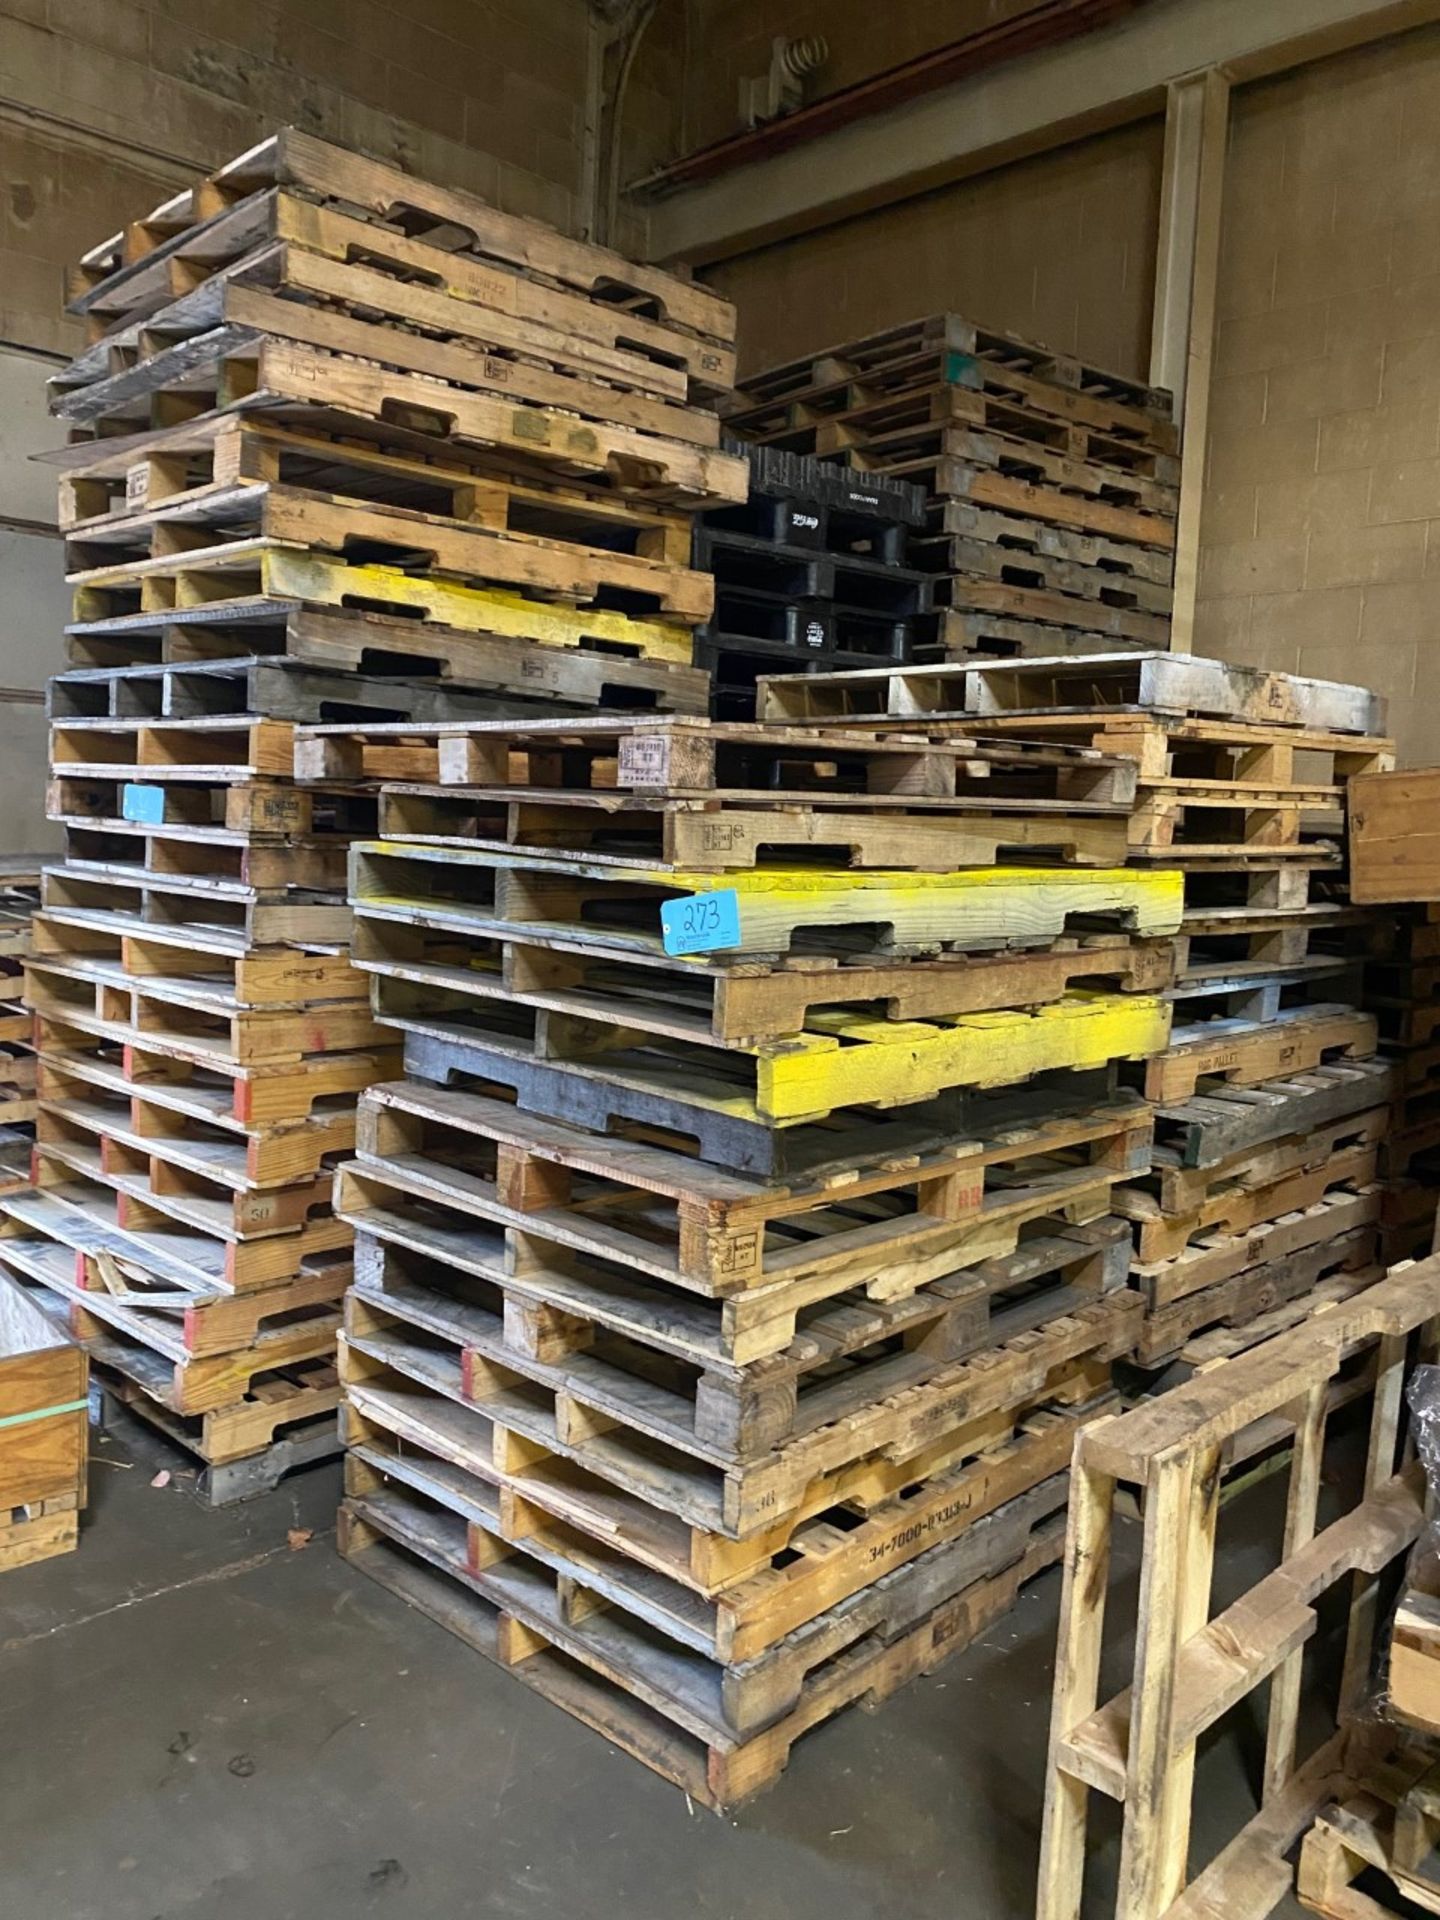 Lot-Approximately 180-200 Wood Pallets in (3) Rows, 40"-44" x 48" Approximate Dimensions